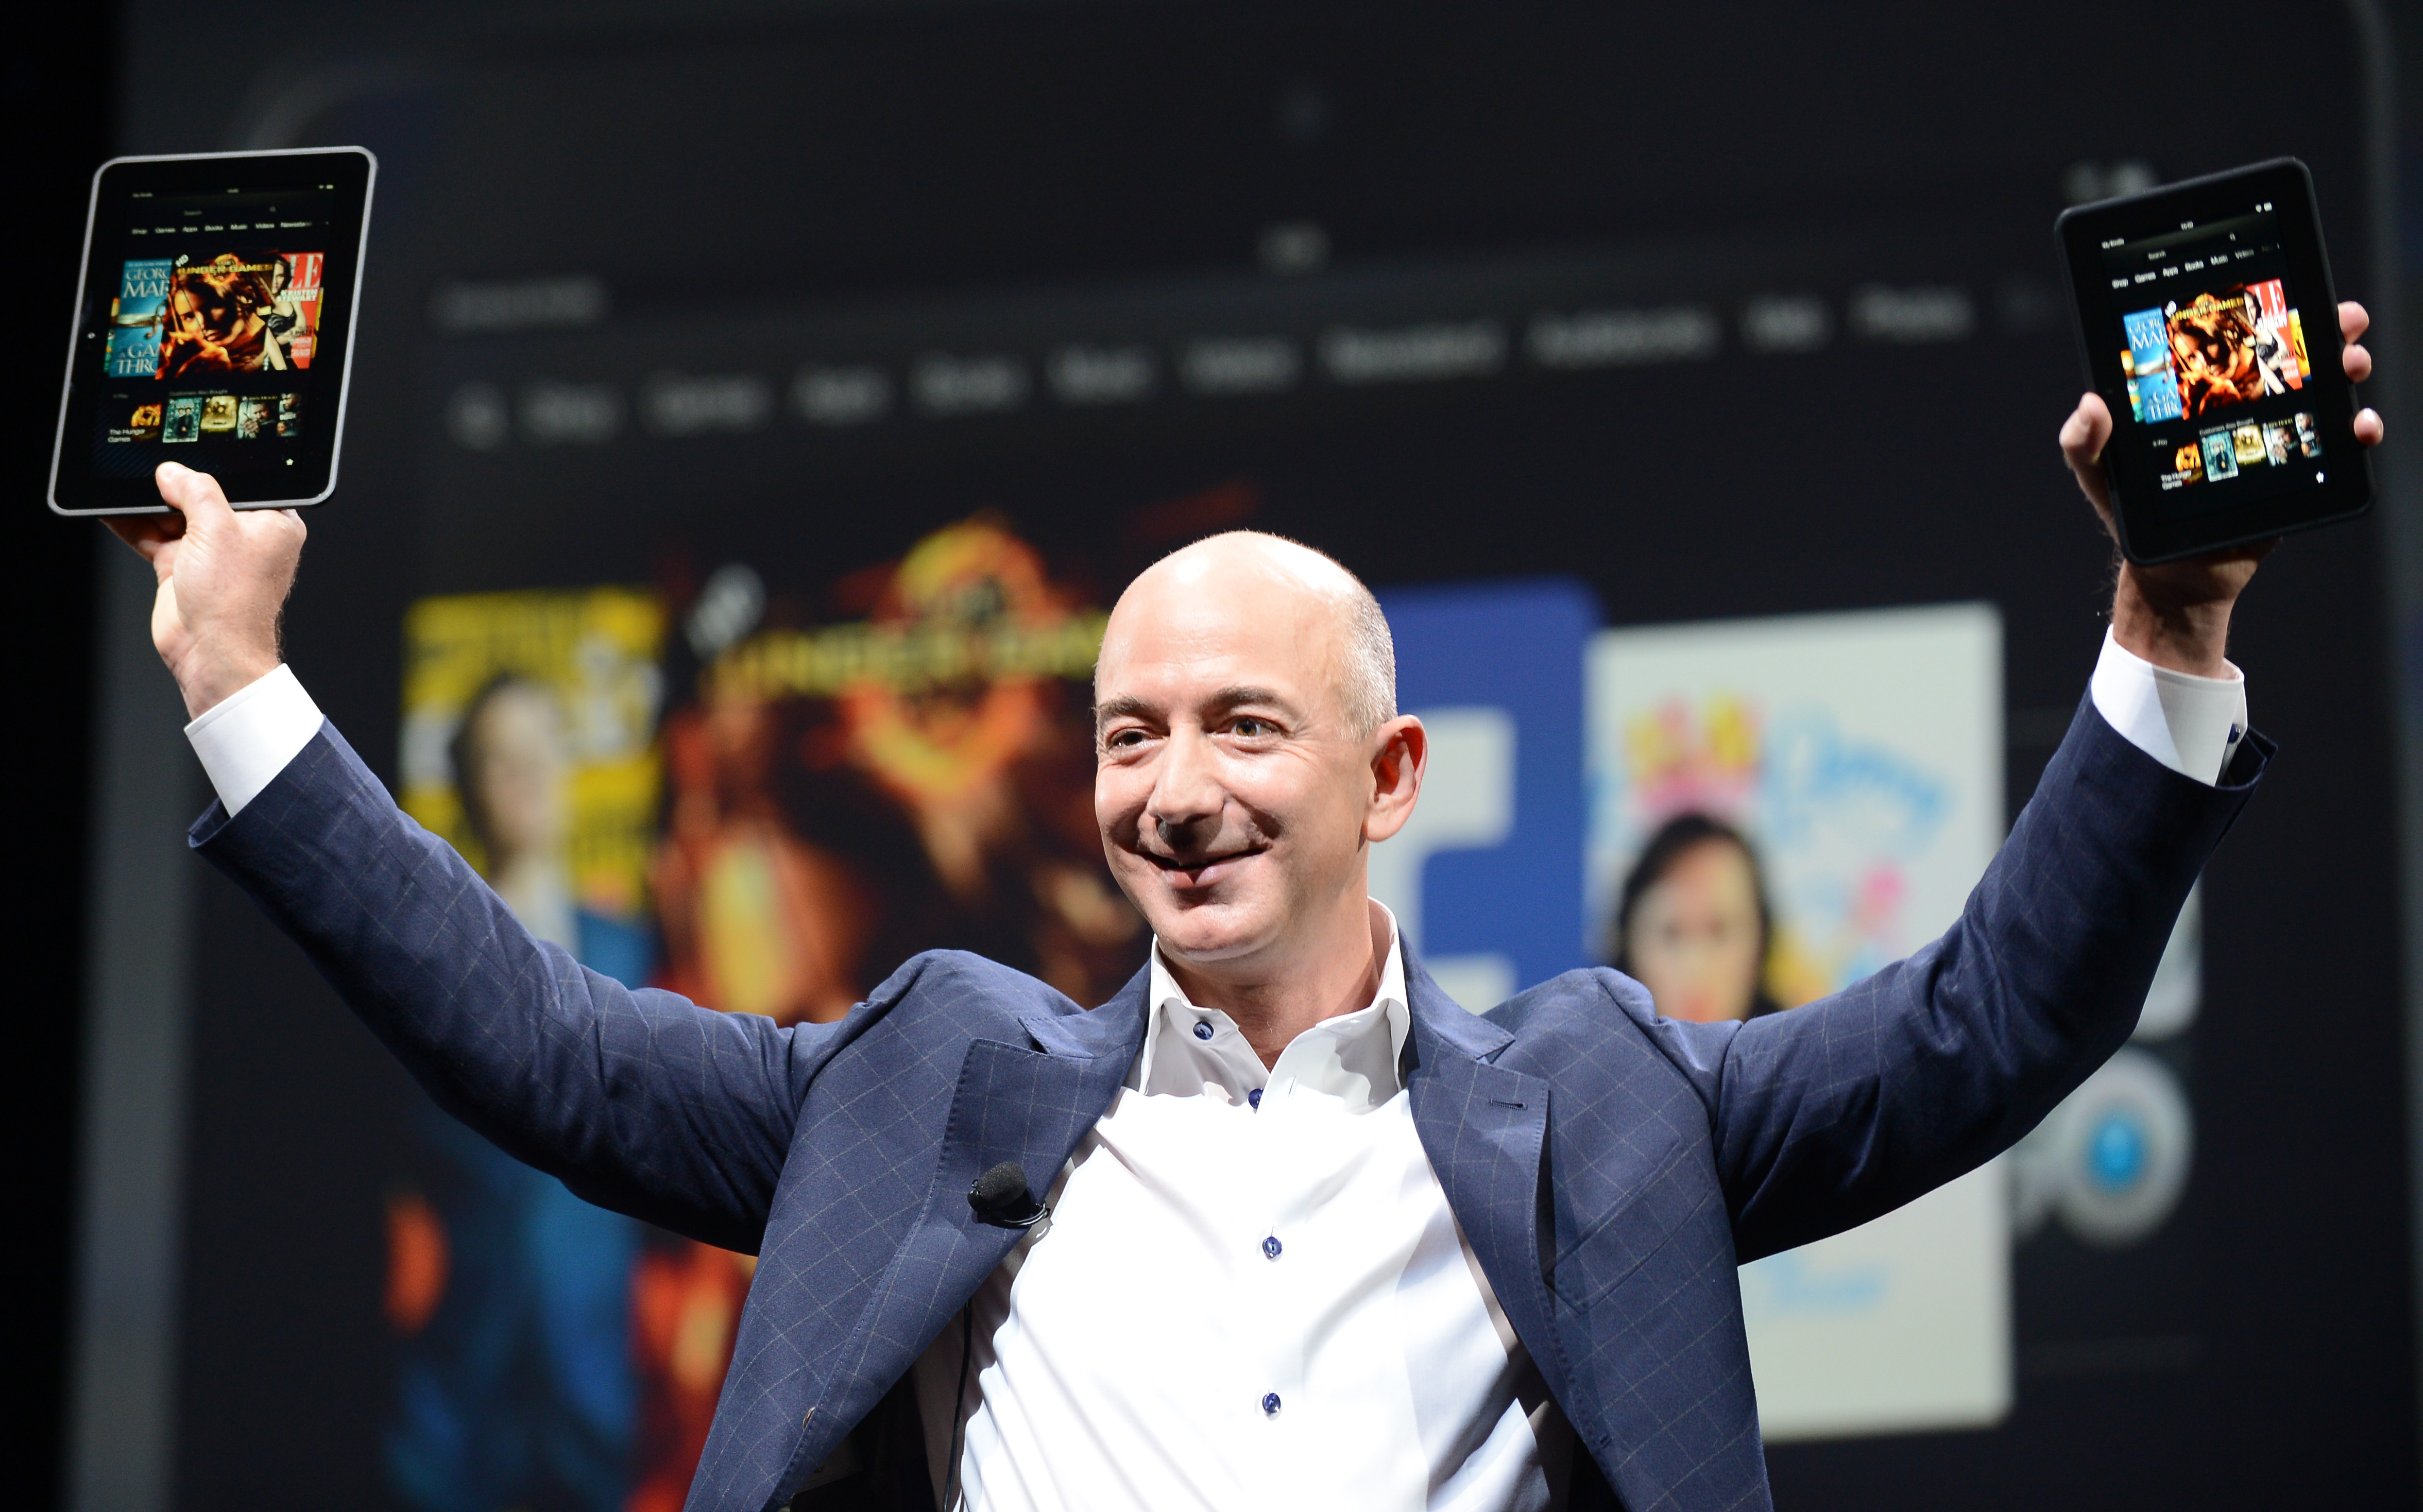 Jeff Bezos, CEO of Amazon, introduces new Kindle Fire HD Family during the AMAZON press conference on September 06, 2012 in Santa Monica, California. (Joe Klamar&mdash;AFP/Getty Images)